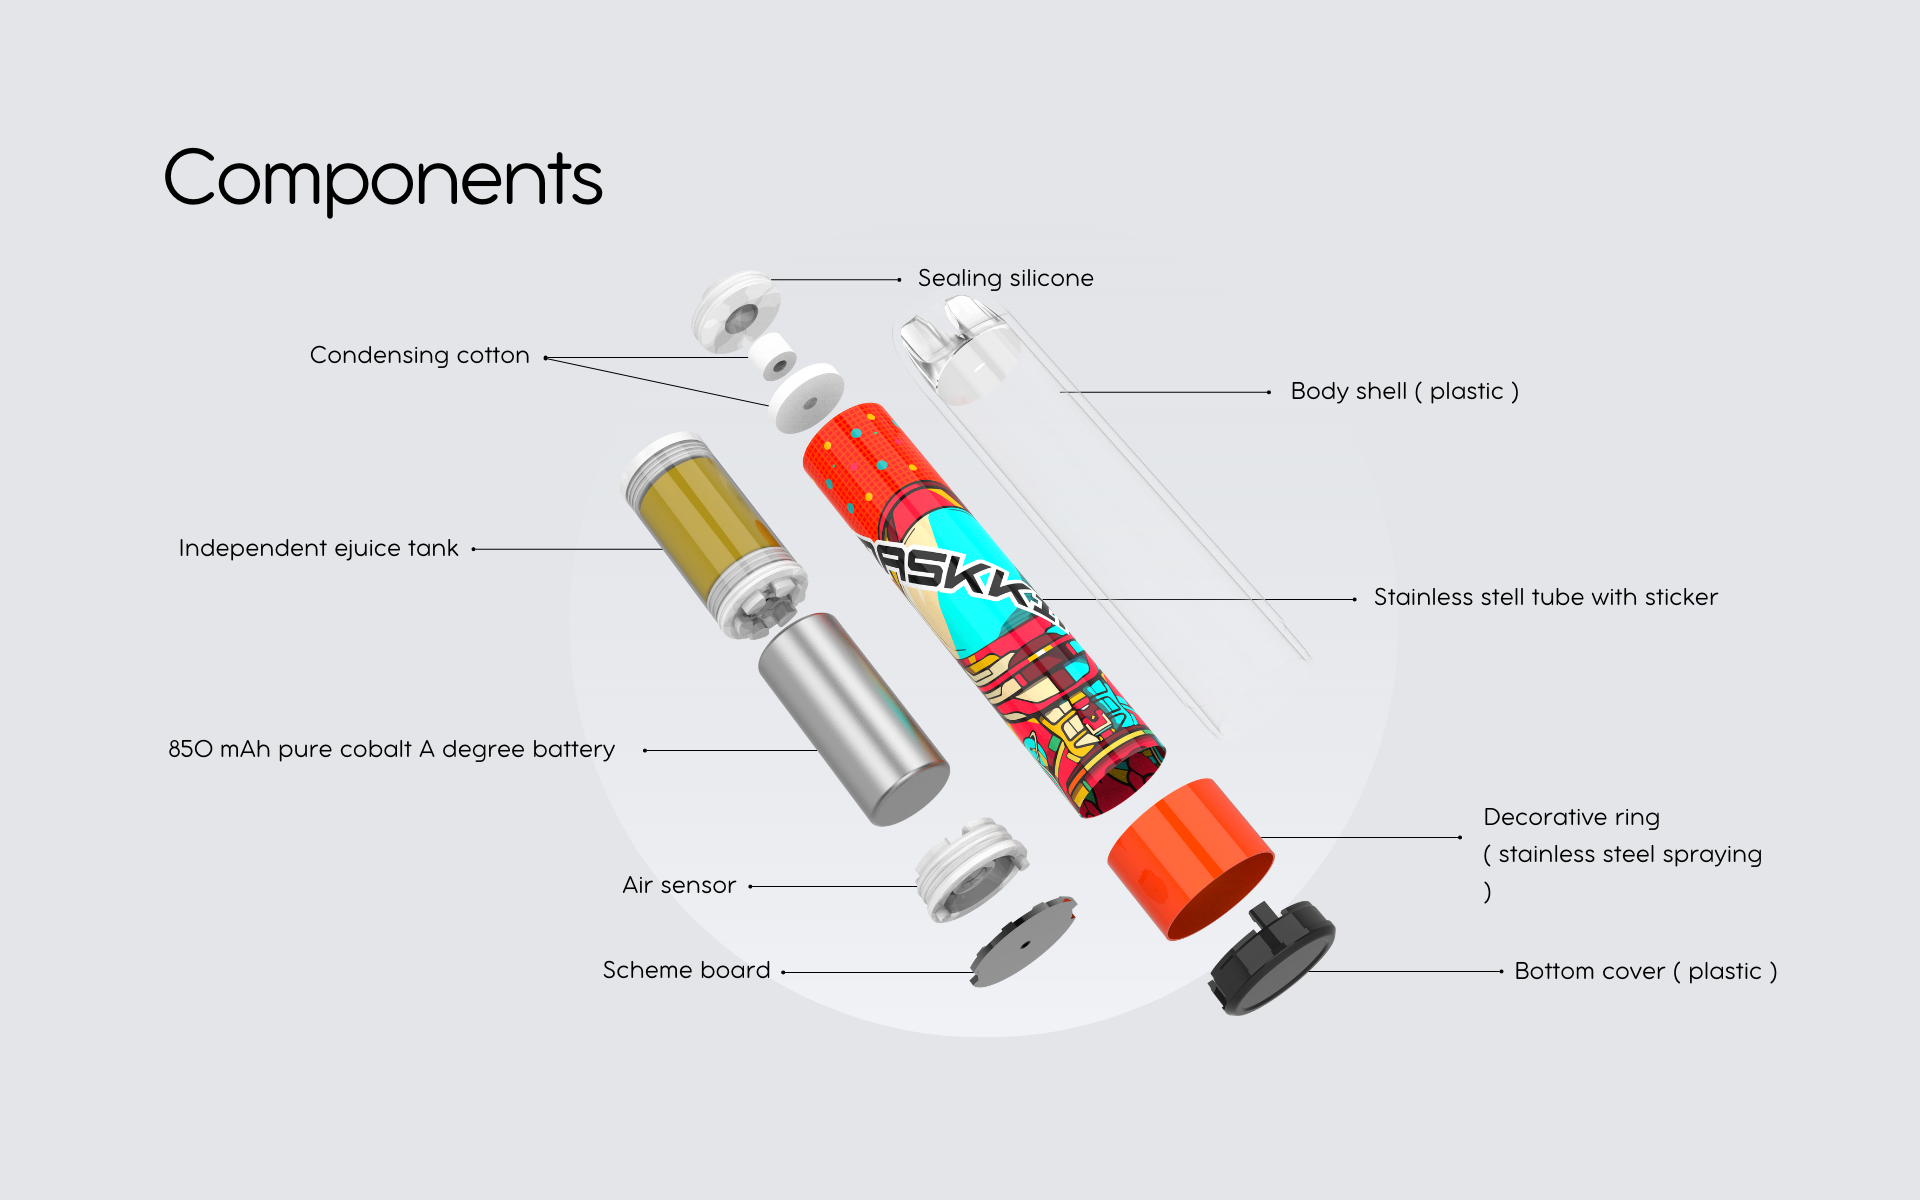 Components of flavored disposable vape